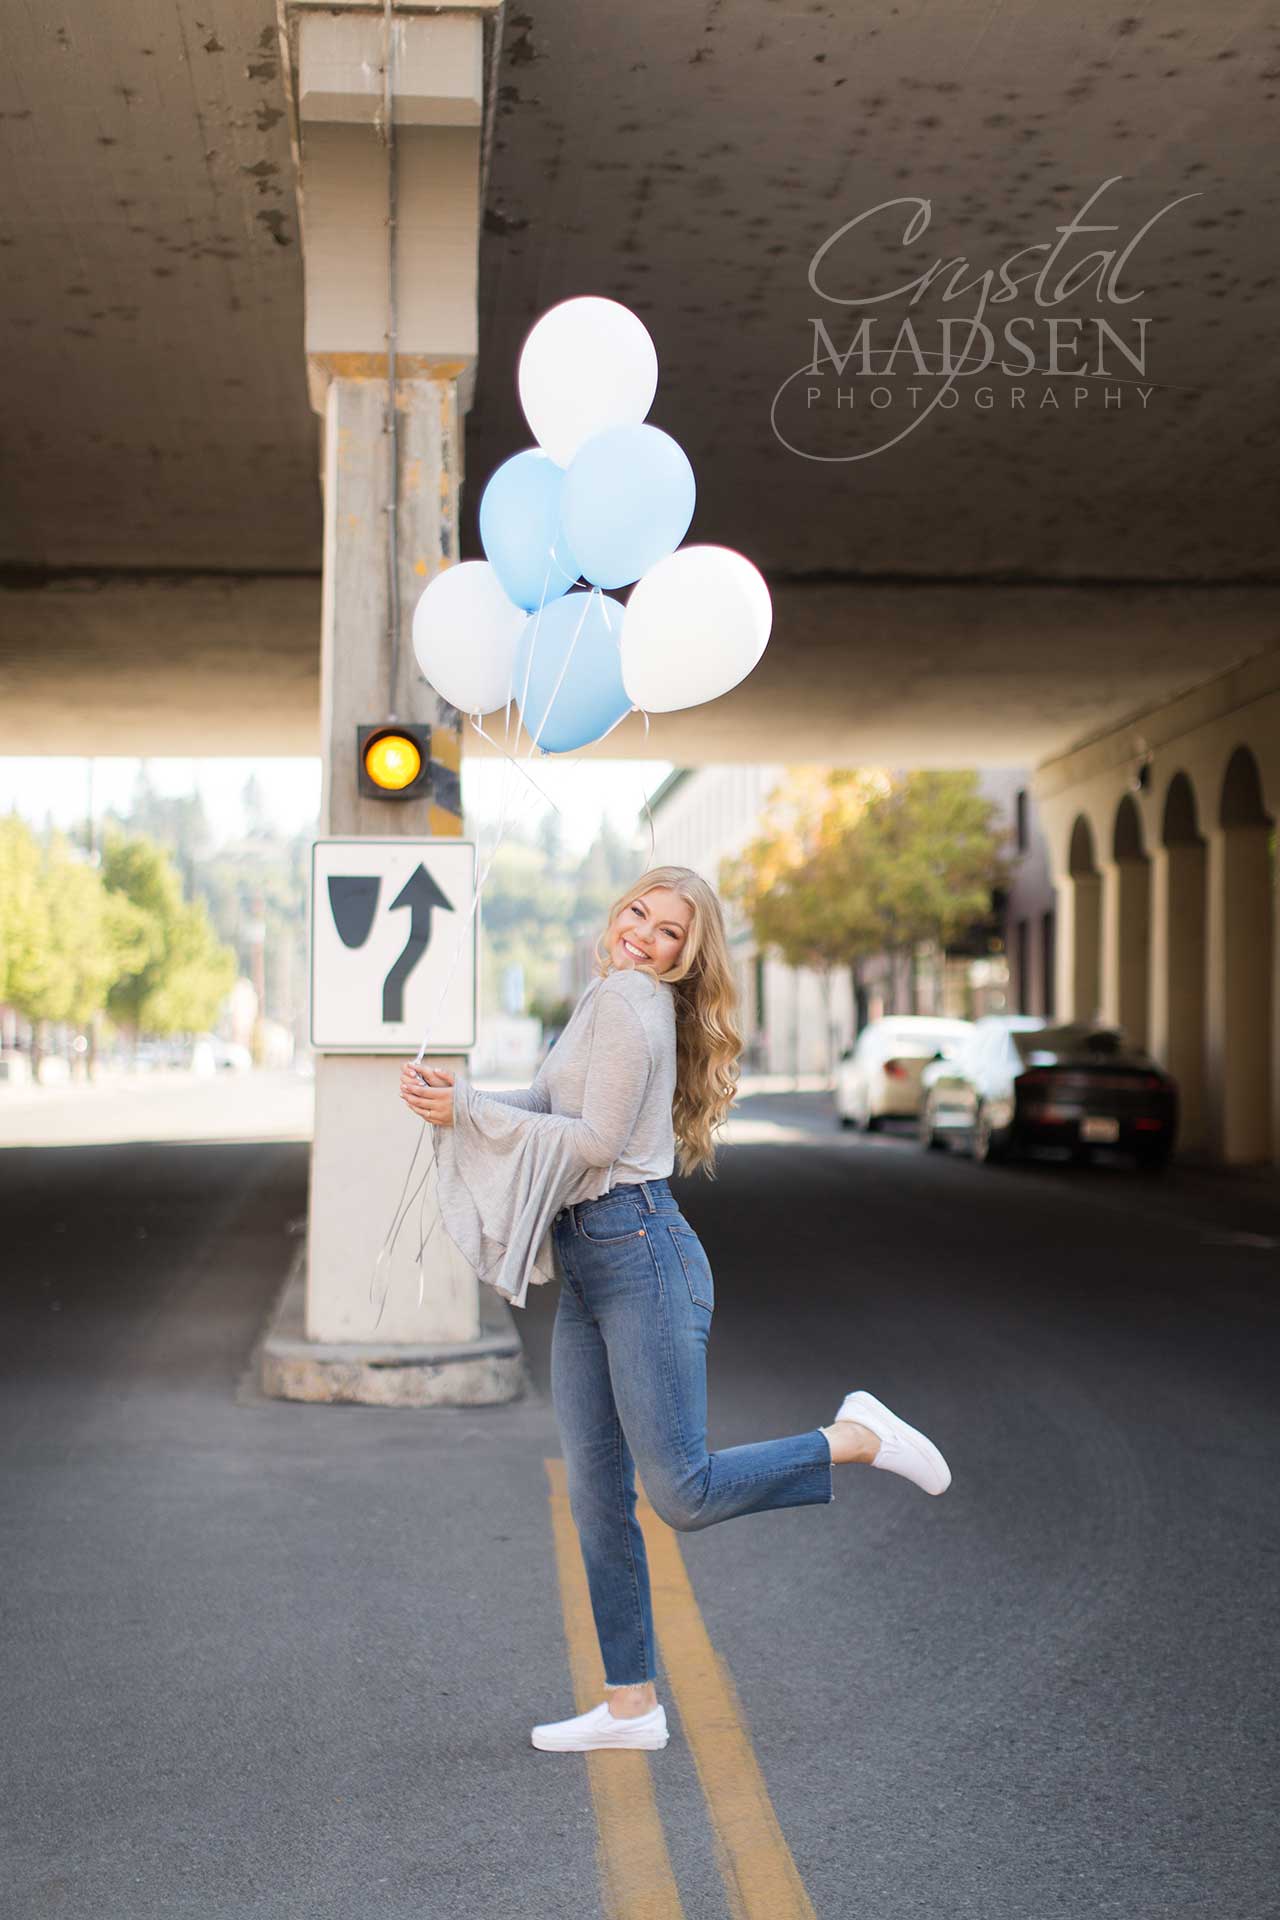 balloons are great props for senior pictures